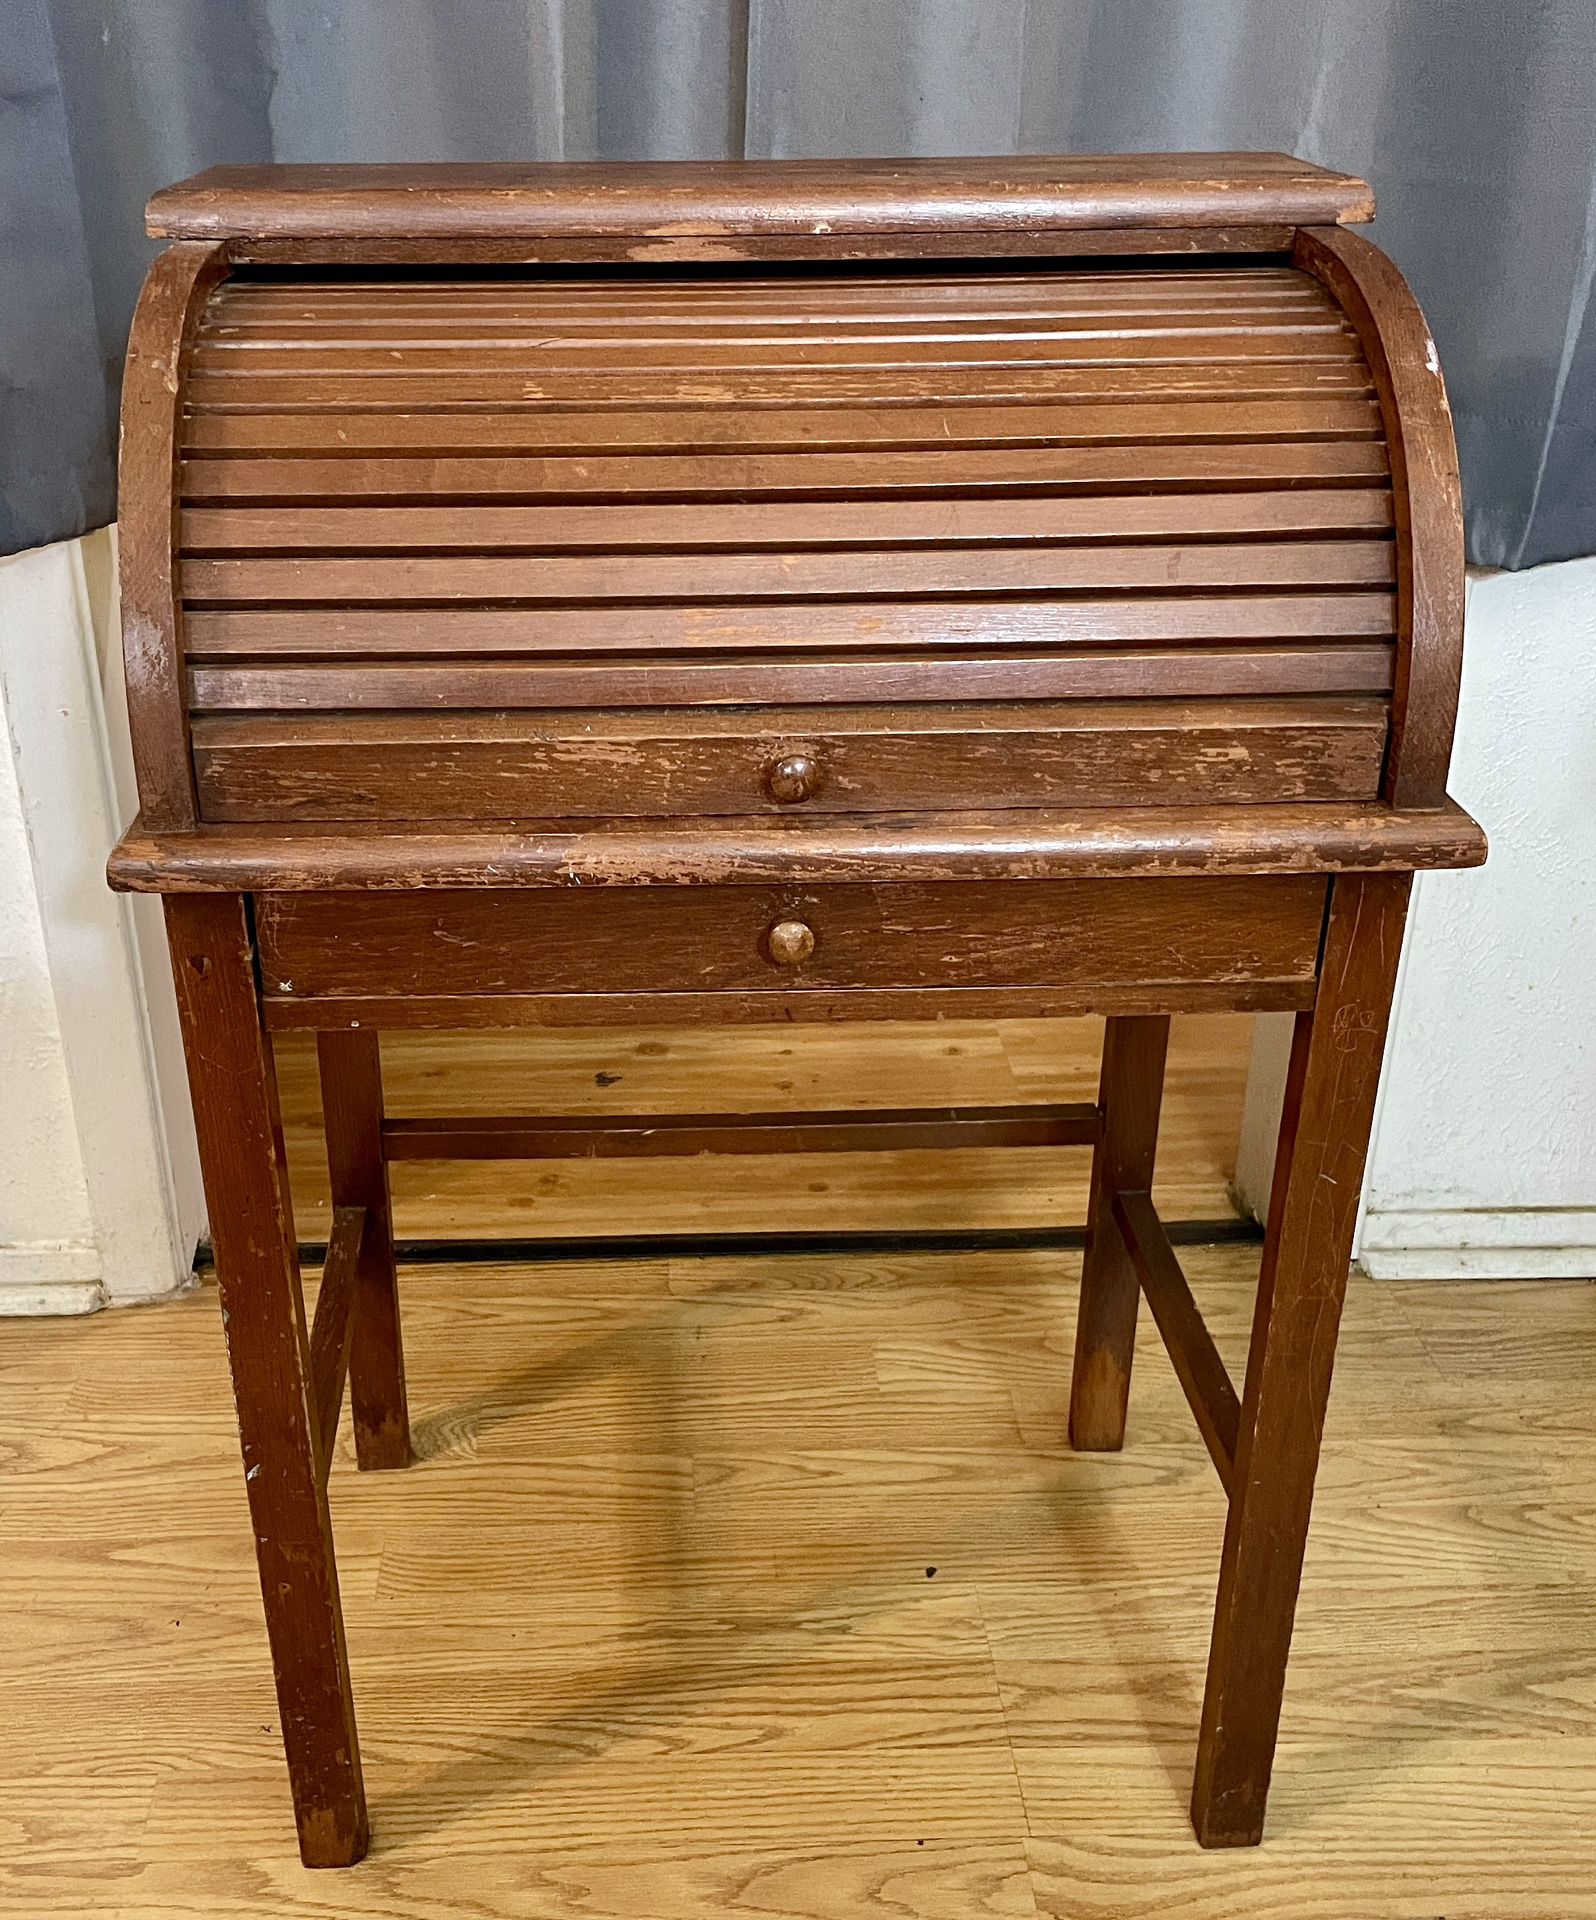 Small Wooden Roll Top Desk Or End Table